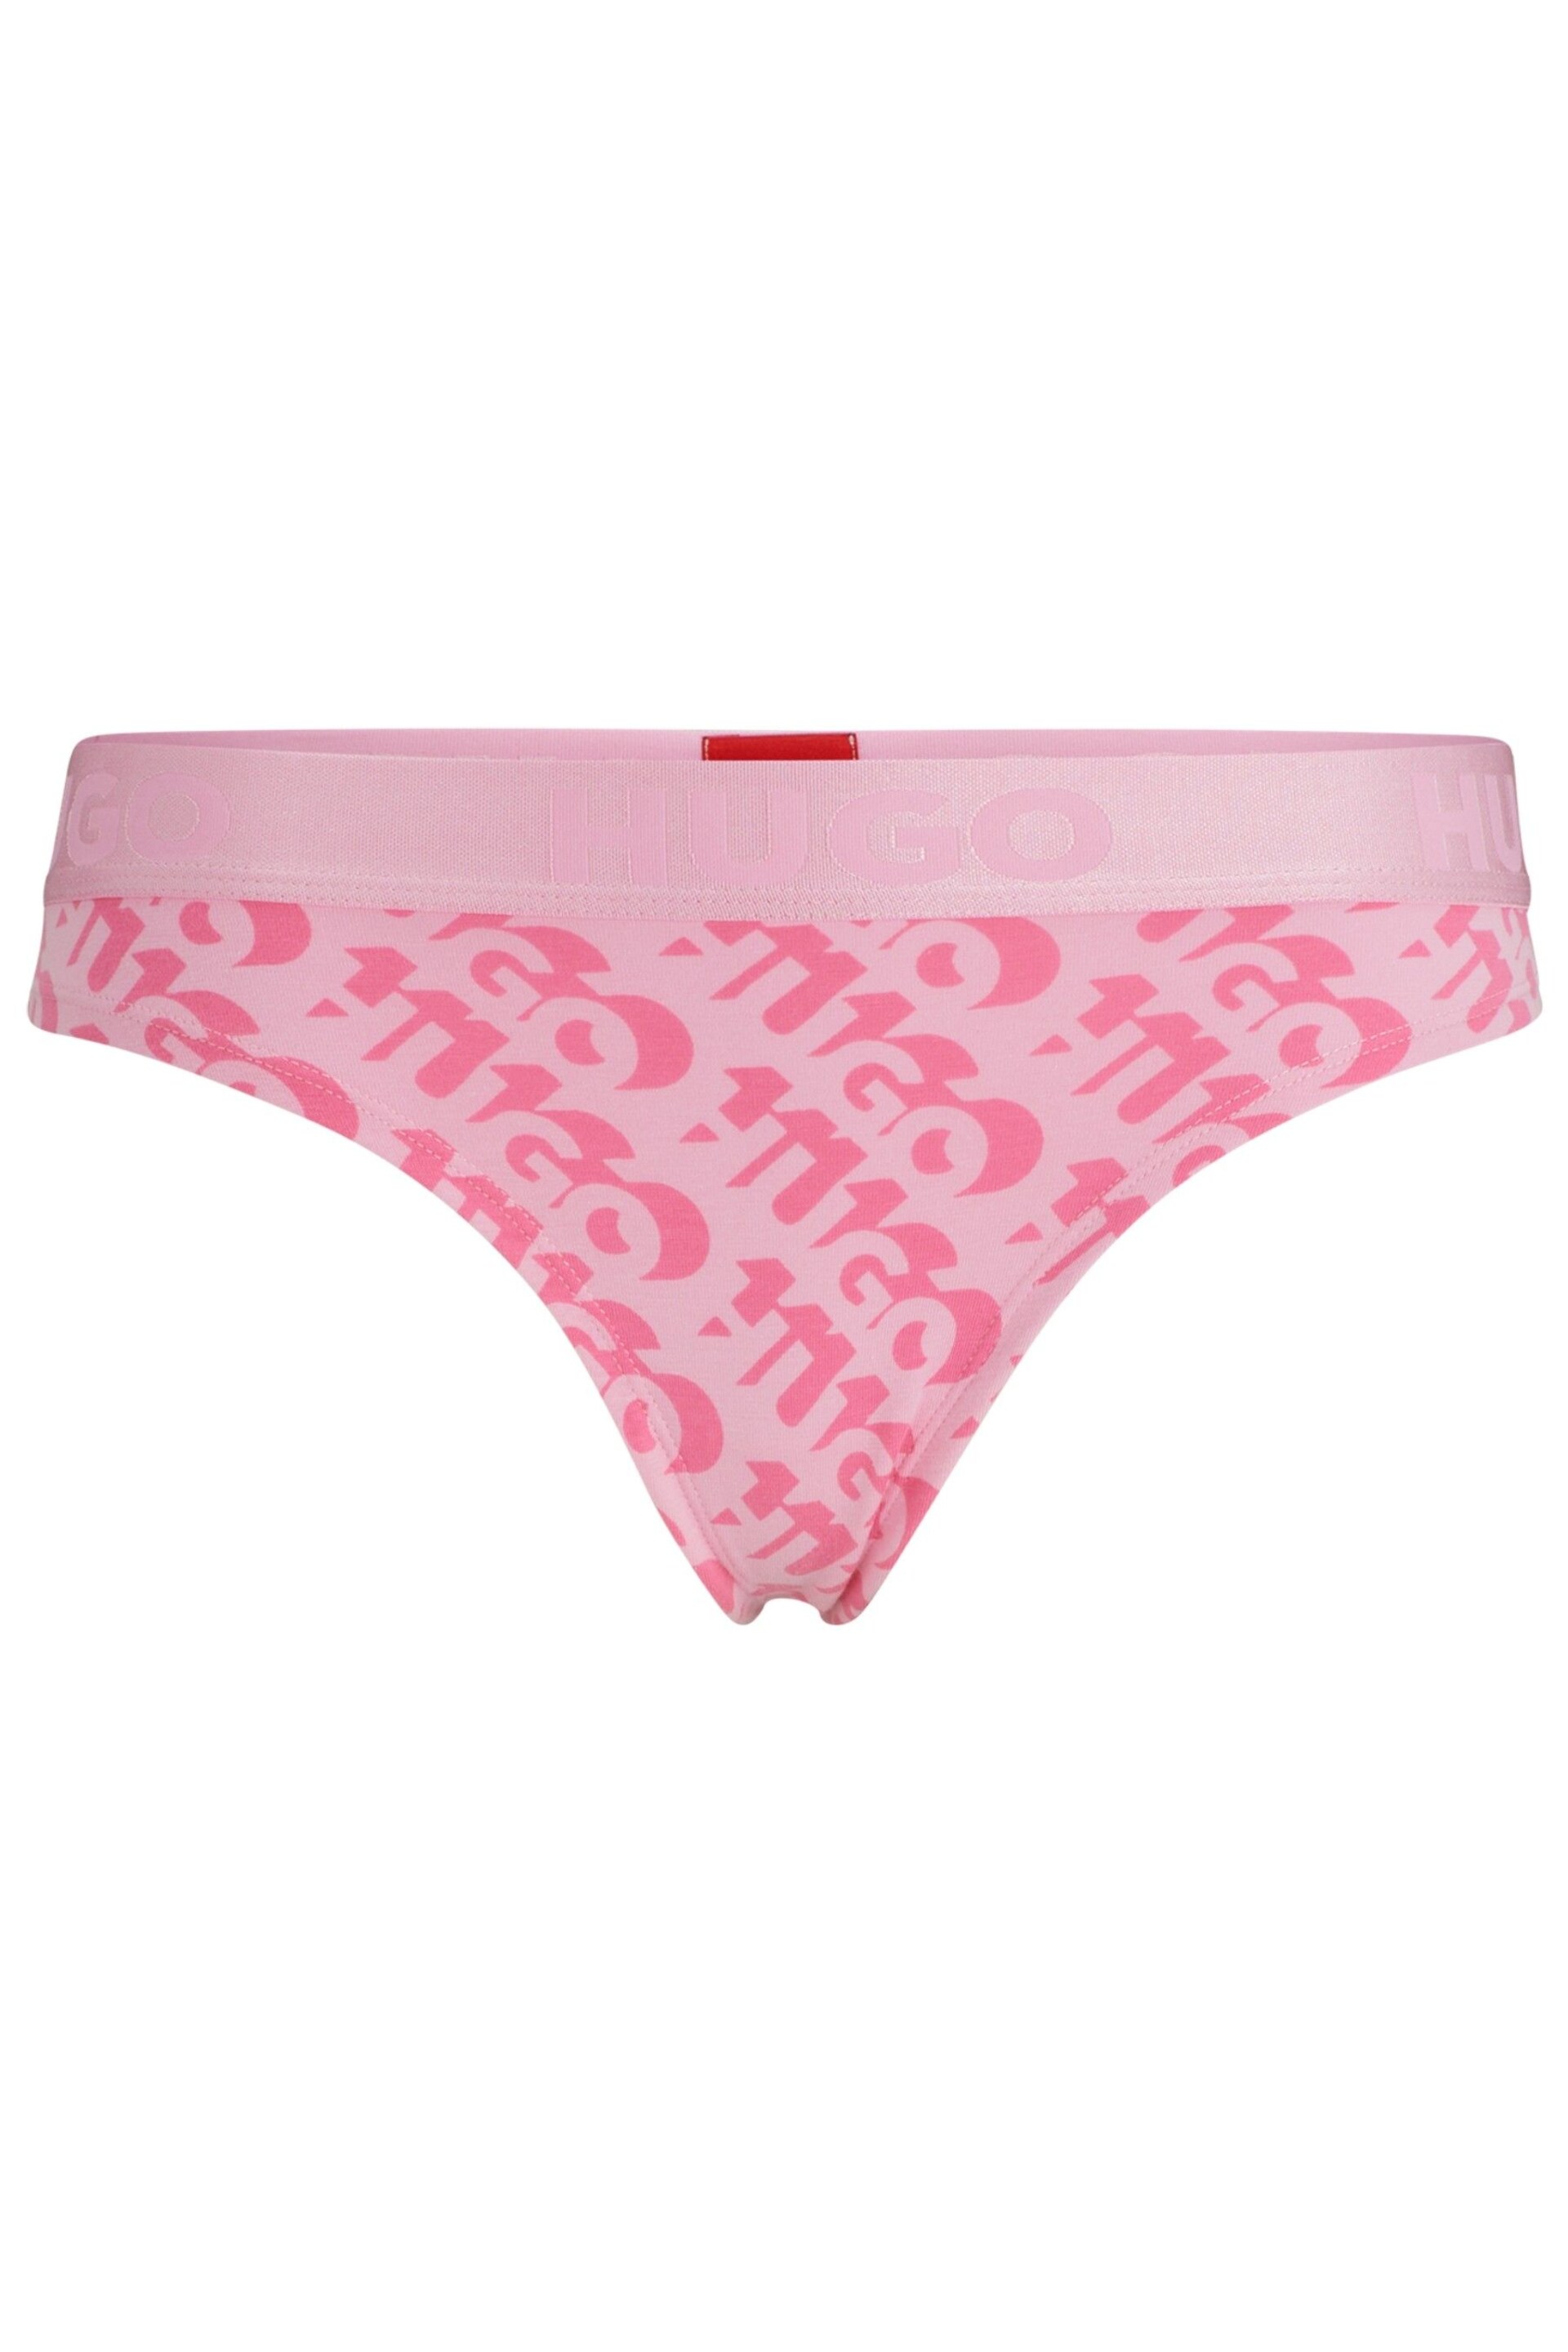 HUGO Pink Stretch-Cotton Thongs With Repeat Knickers - Image 5 of 5